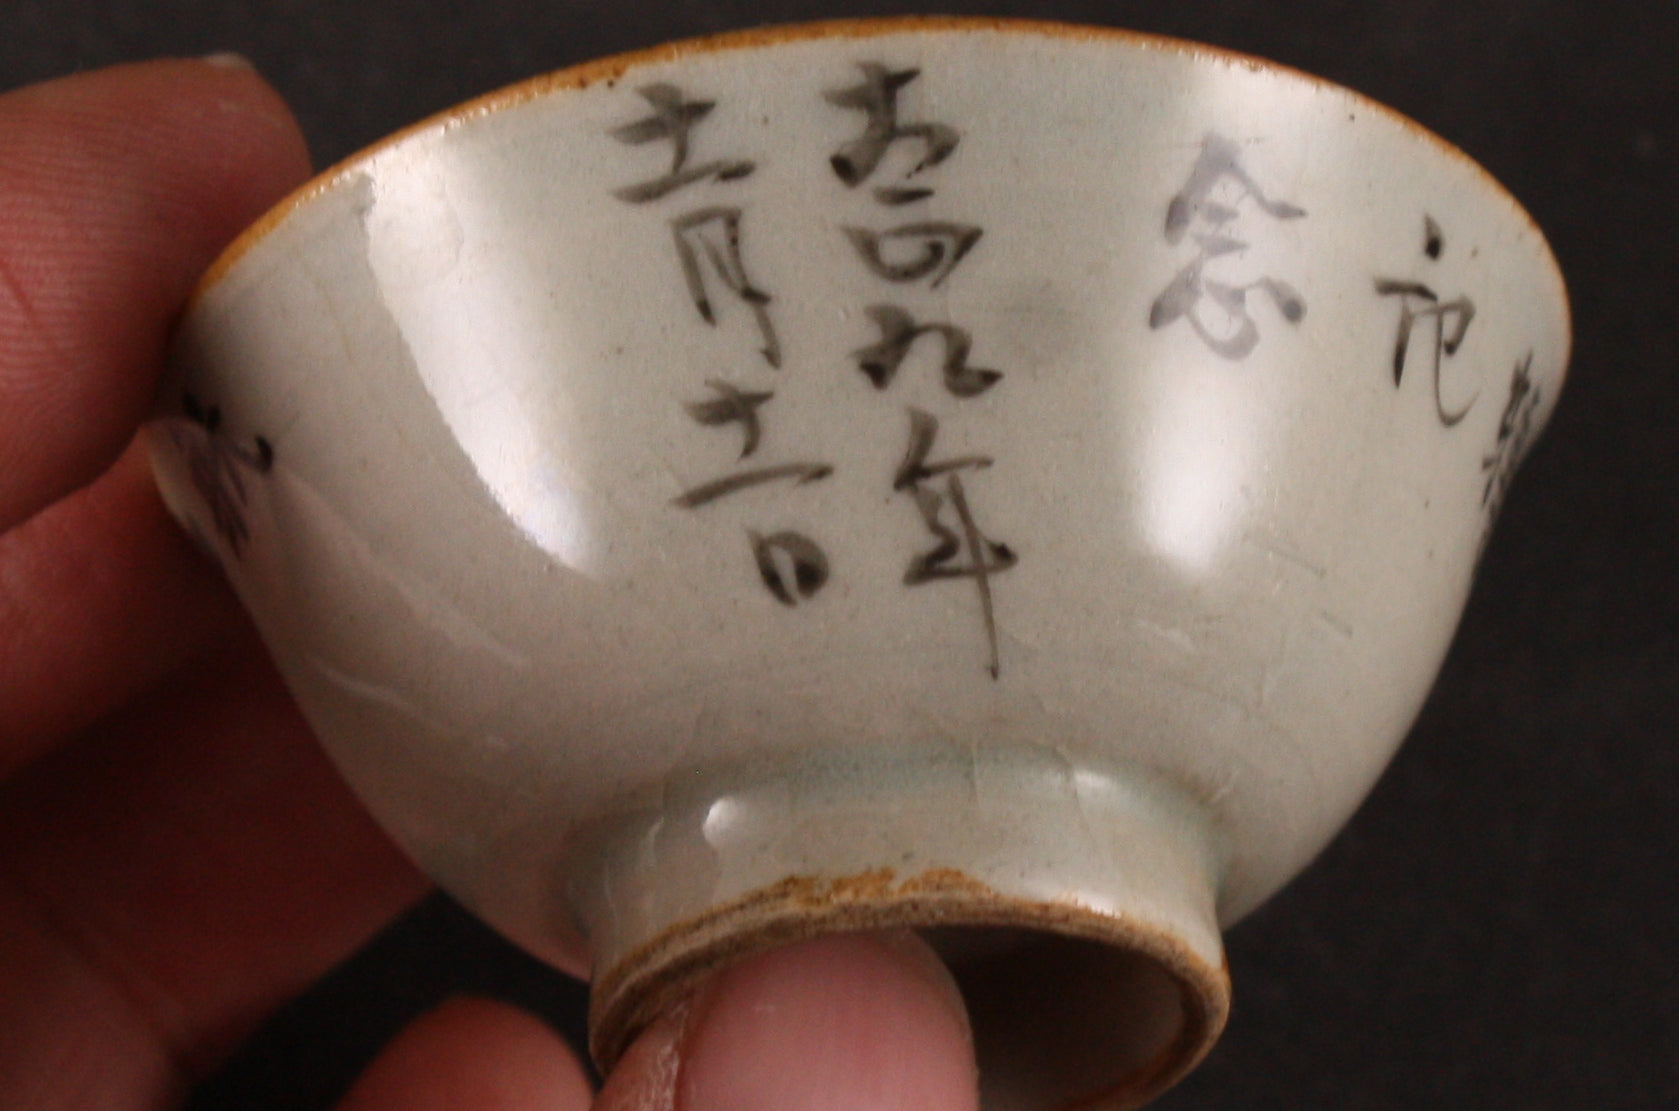 Antique Japanese Military 1920 Air Unit Commemoration Army Sake Cup